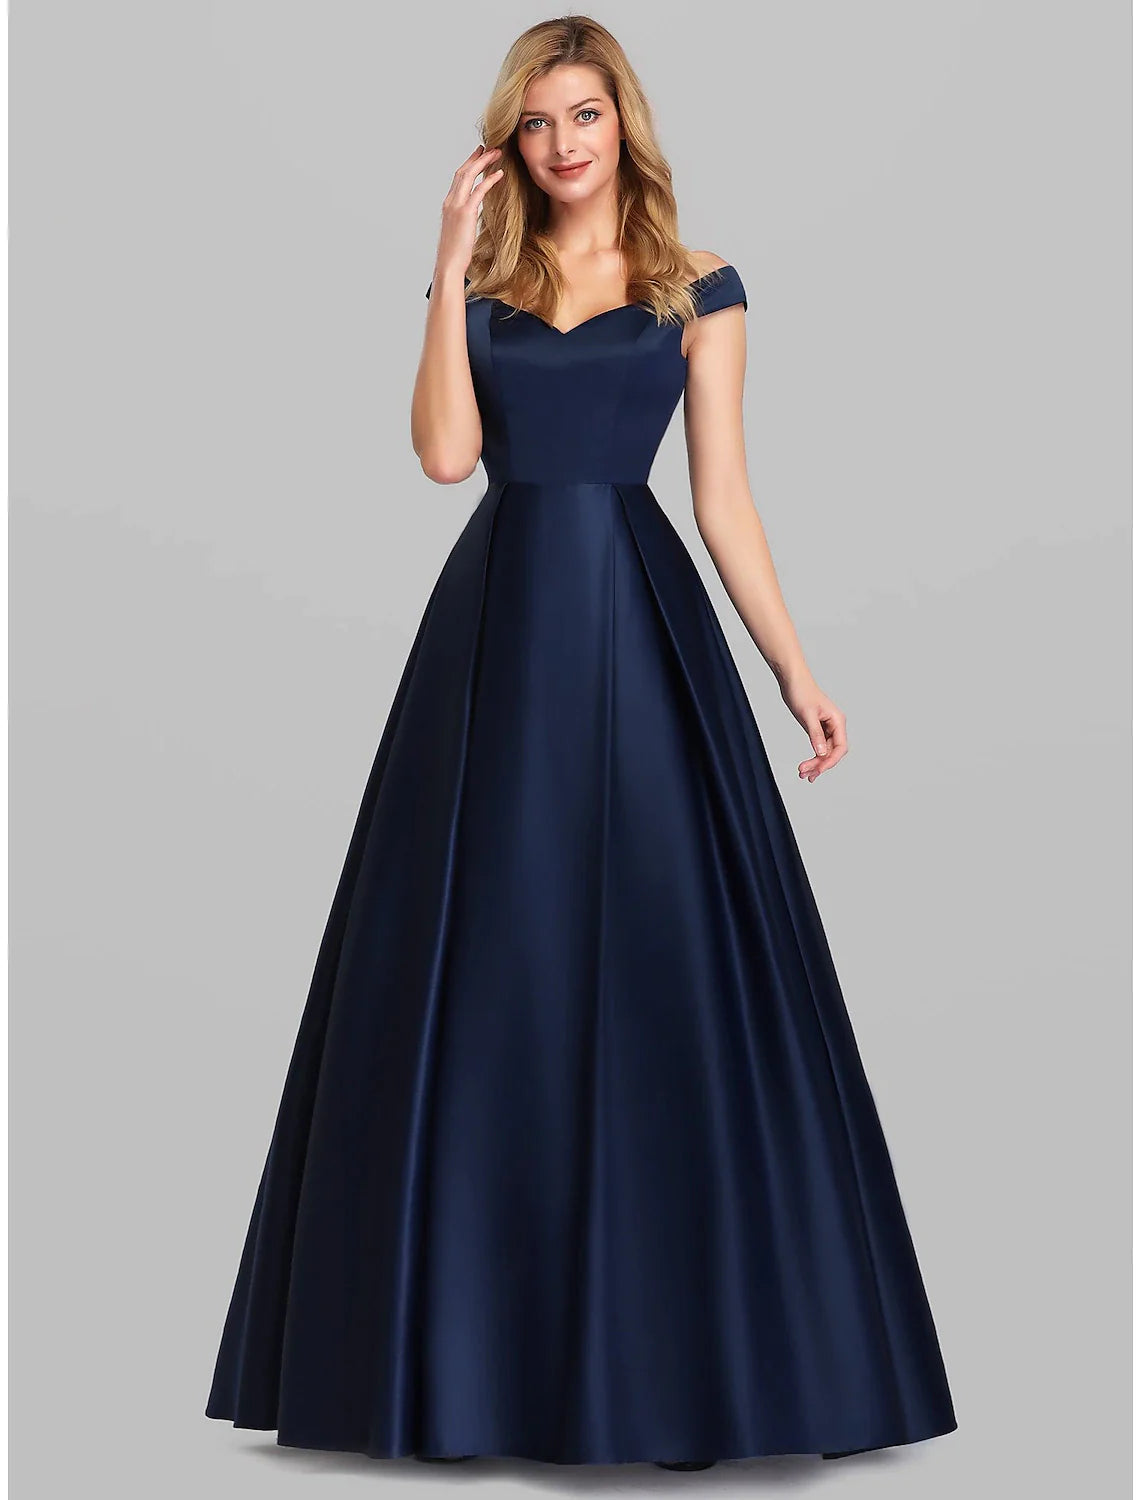 A-Line Evening Gown Elegant & Luxurious Dress Wedding Guest Floor Length Sleeveless Plunging Neck Charmeuse with Ruched